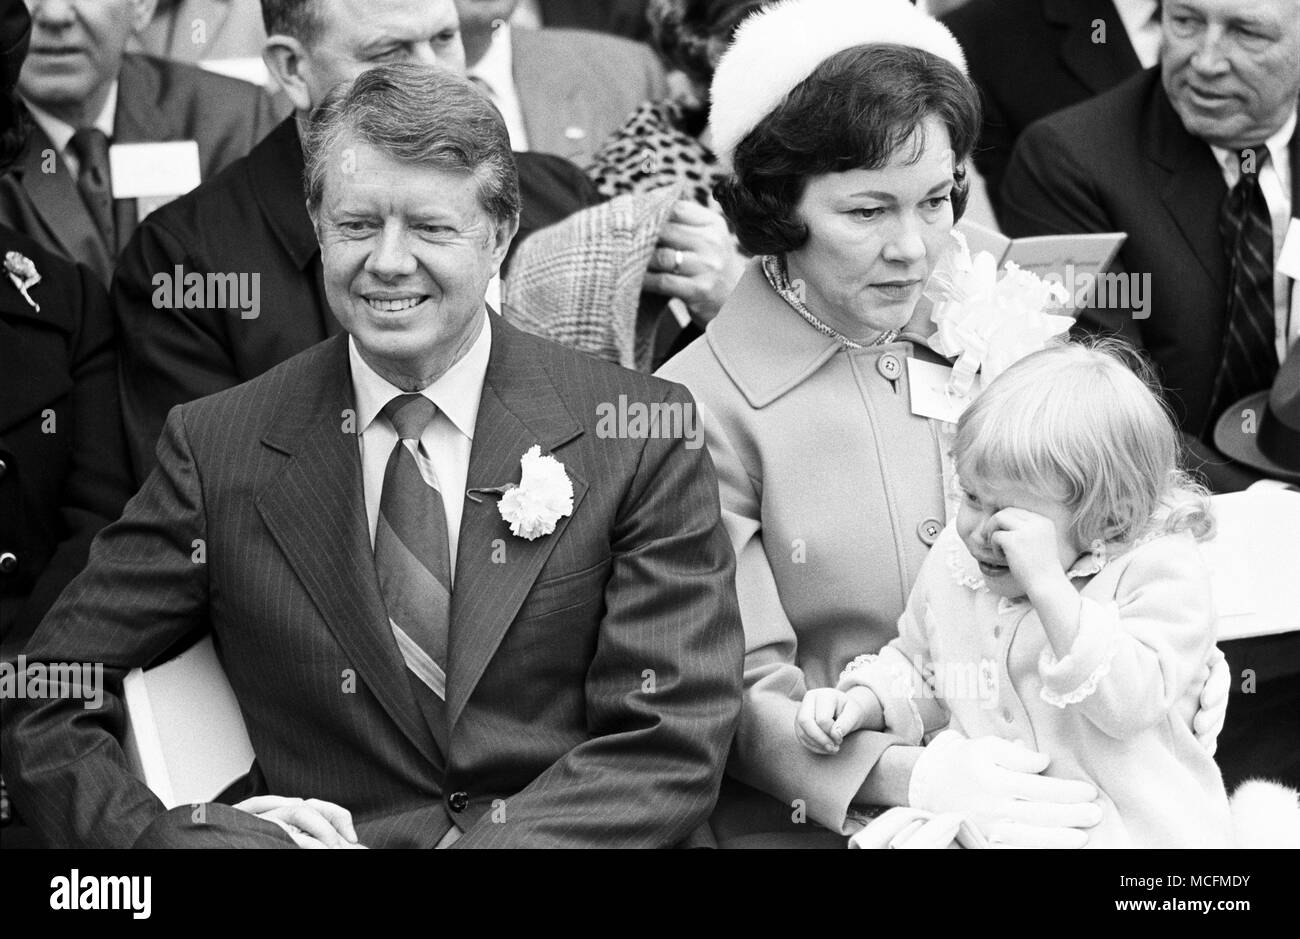 State Senator Jimmy Carter waits to be sworn in as Georgia's new governor . Carter is seated with wife Rosalynn Carter and daughter Amy Carter at the Georgia Governors Inauguration. Atlanta. 1971 Stock Photo